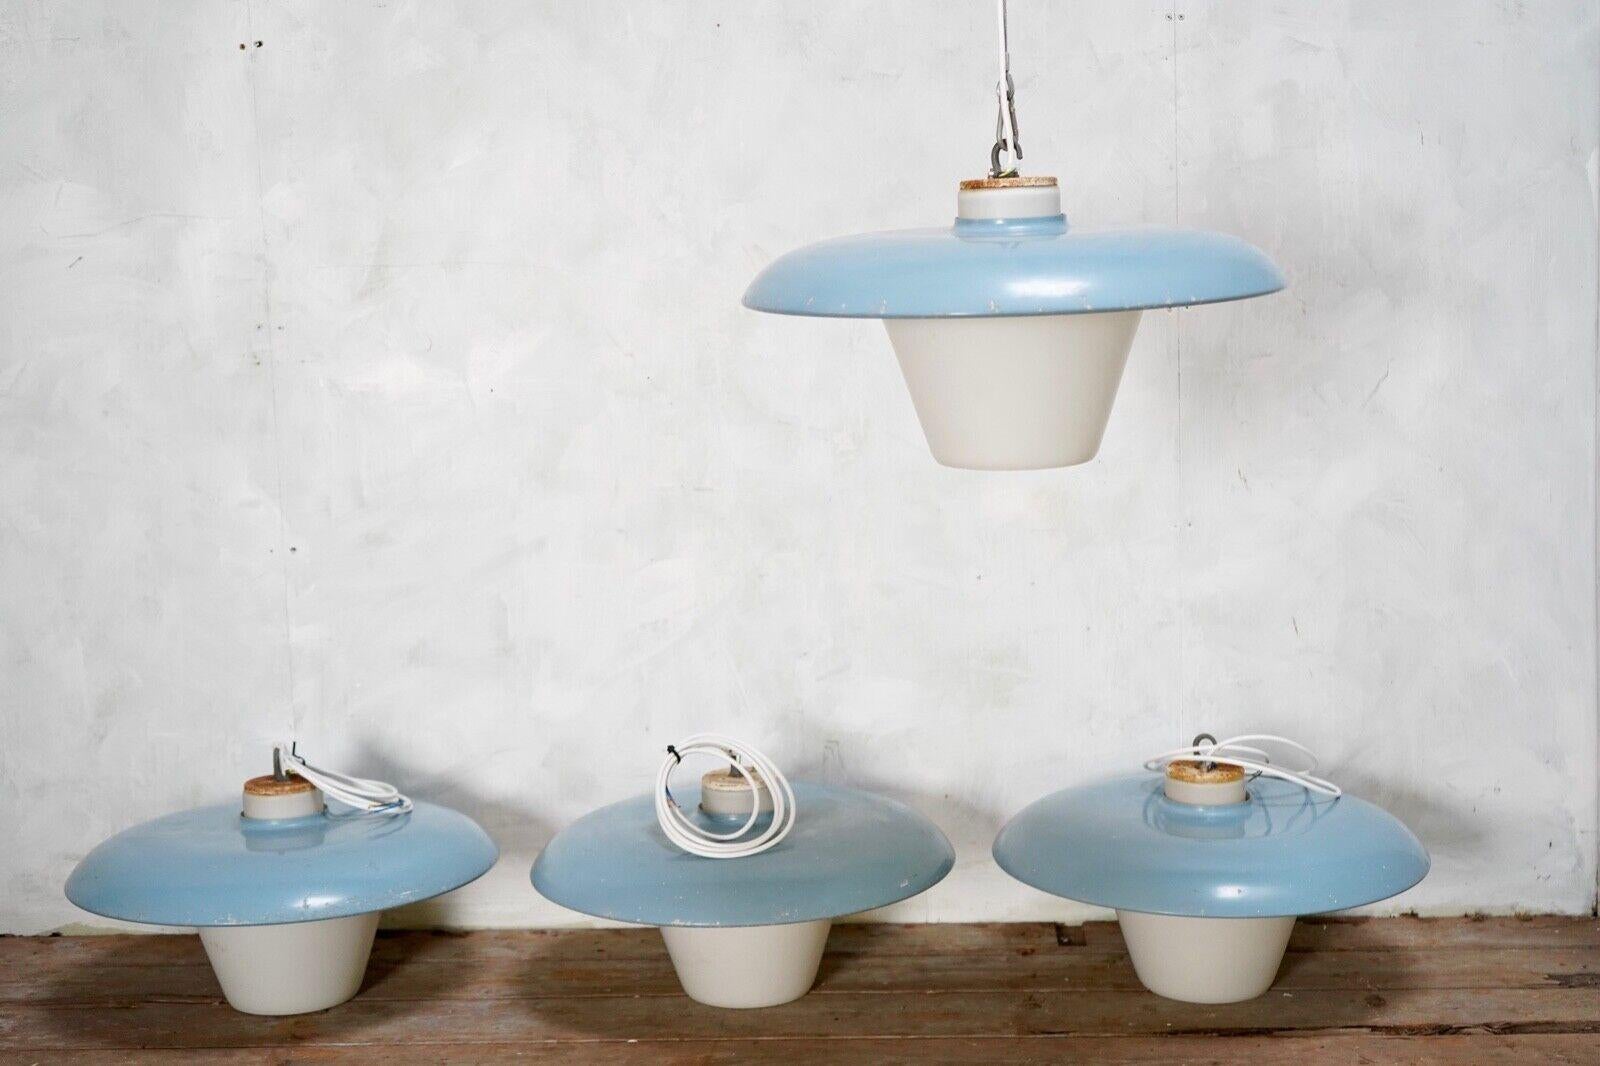 Blue Sheet metal & opaline glass pendant by Philips.
The blue metal shade sits on top of the opaline diffuser spilling out light from the top and bottom.
Price is per pendant. We have 4 available.
The shades do have a few blemishes.
Rewired and pat